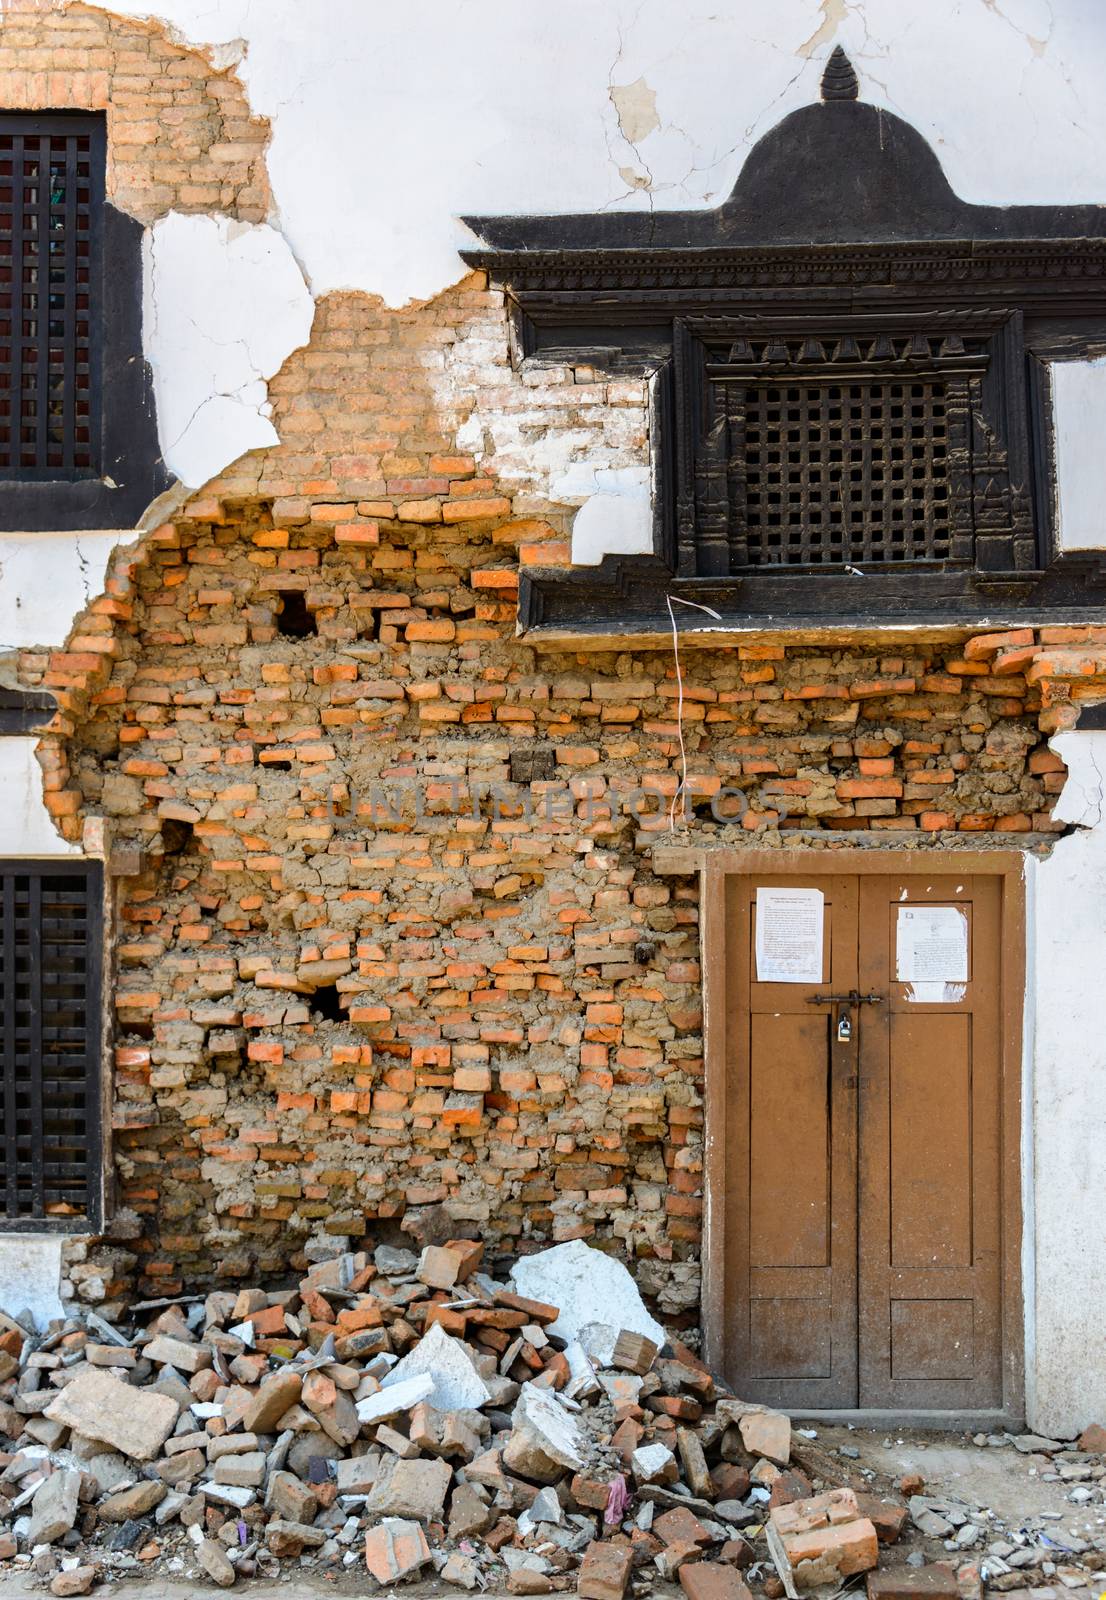 KATHMANDU, NEPAL - MAY 14, 2015: Detail of a damaged facade on Durbar Square which was partially destroyed after two major earthquakes hit Nepal in the past weeks.